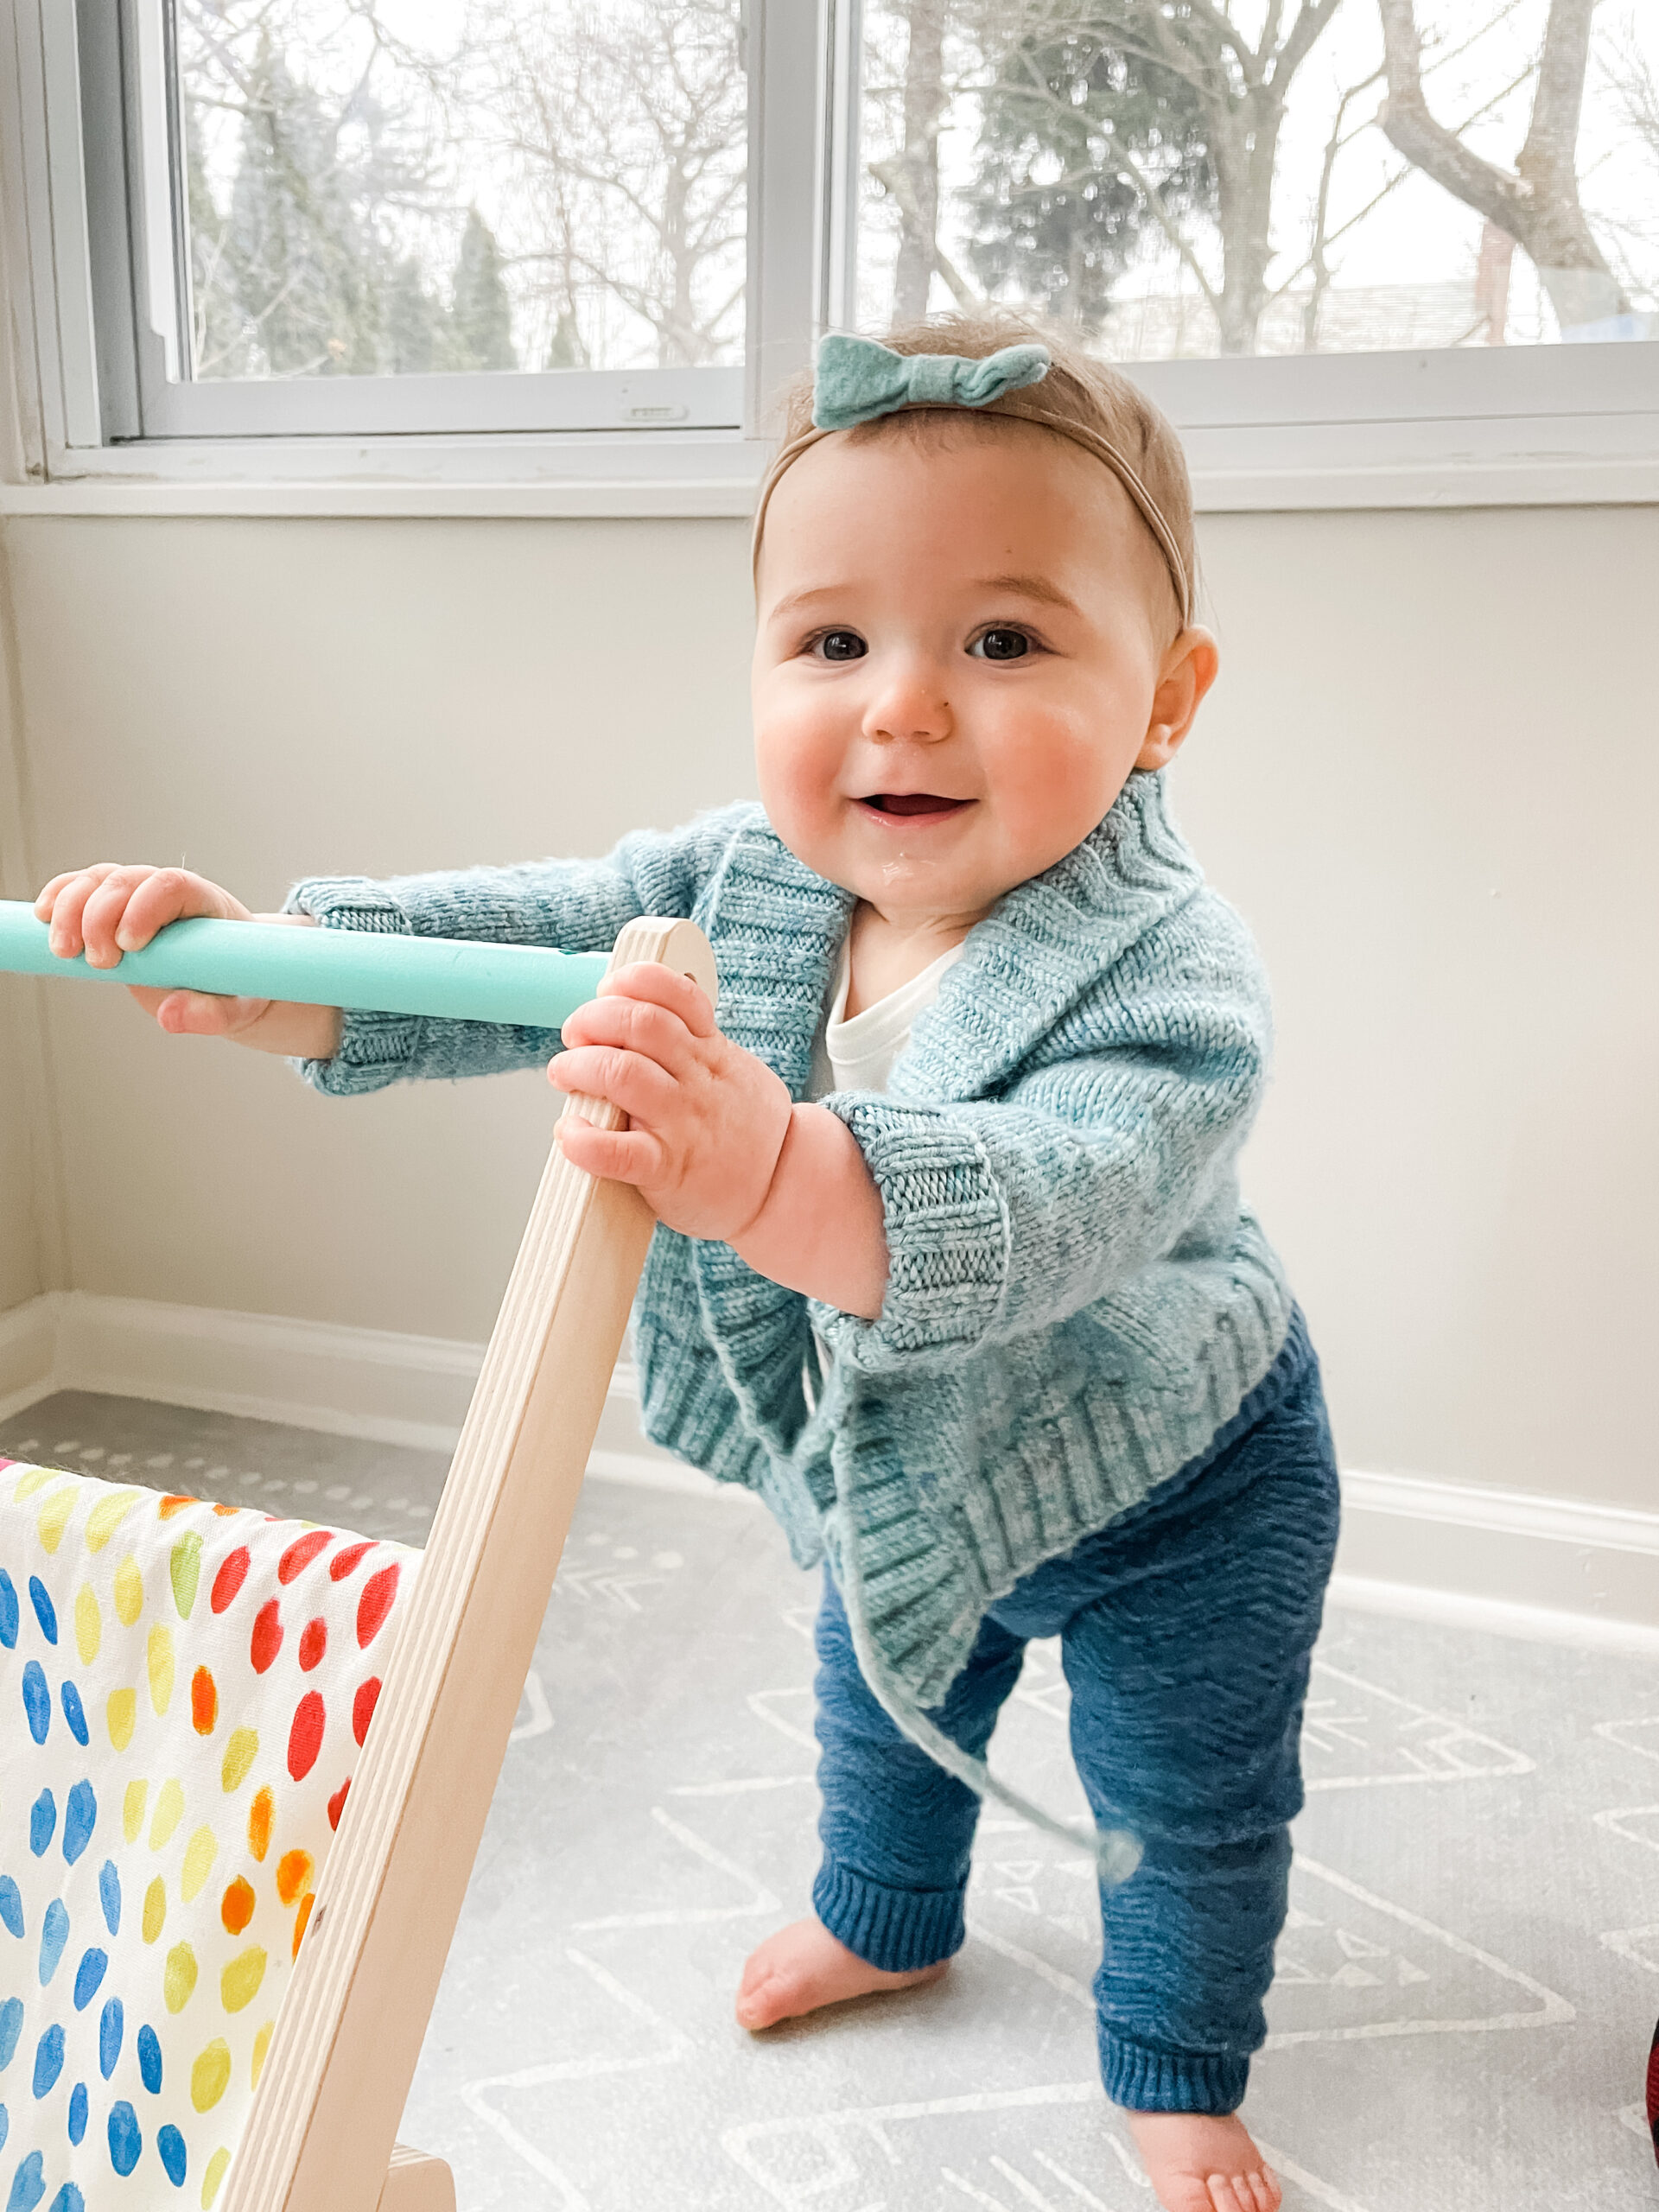 Baby Proofing Tips - The New York Stylist